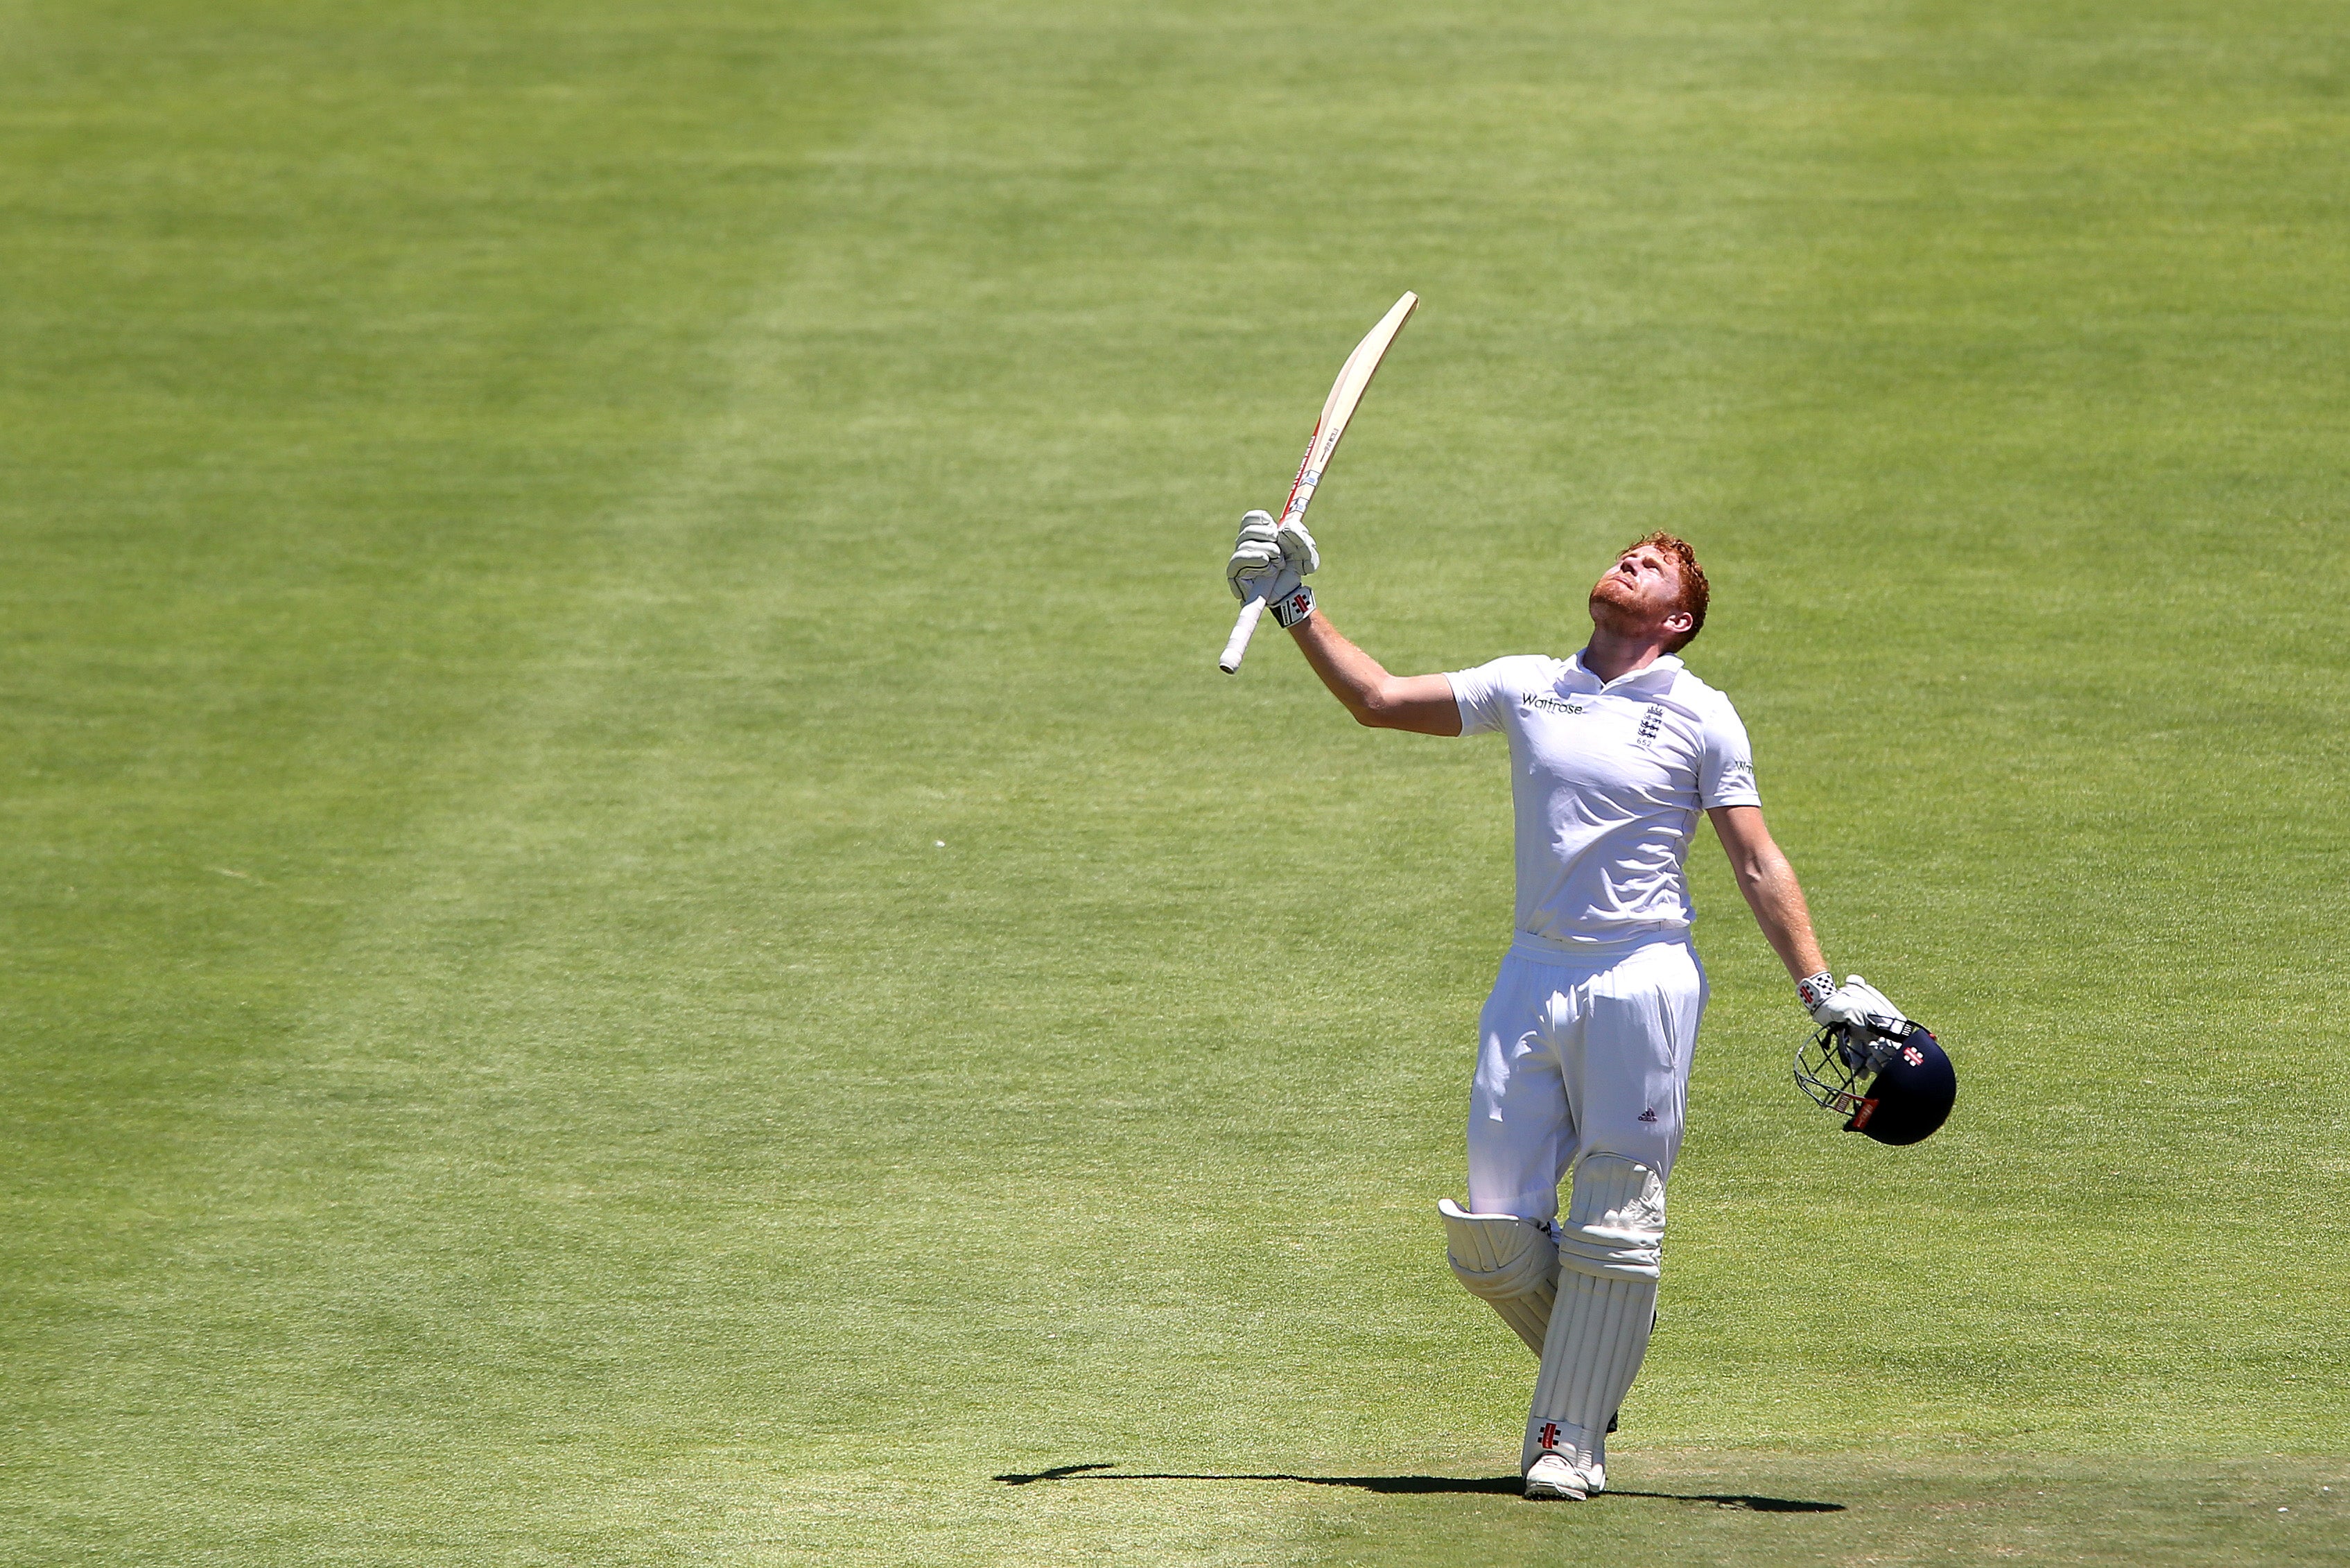 Jonny Bairstow scored his maiden Test century at Cape Town in 2016